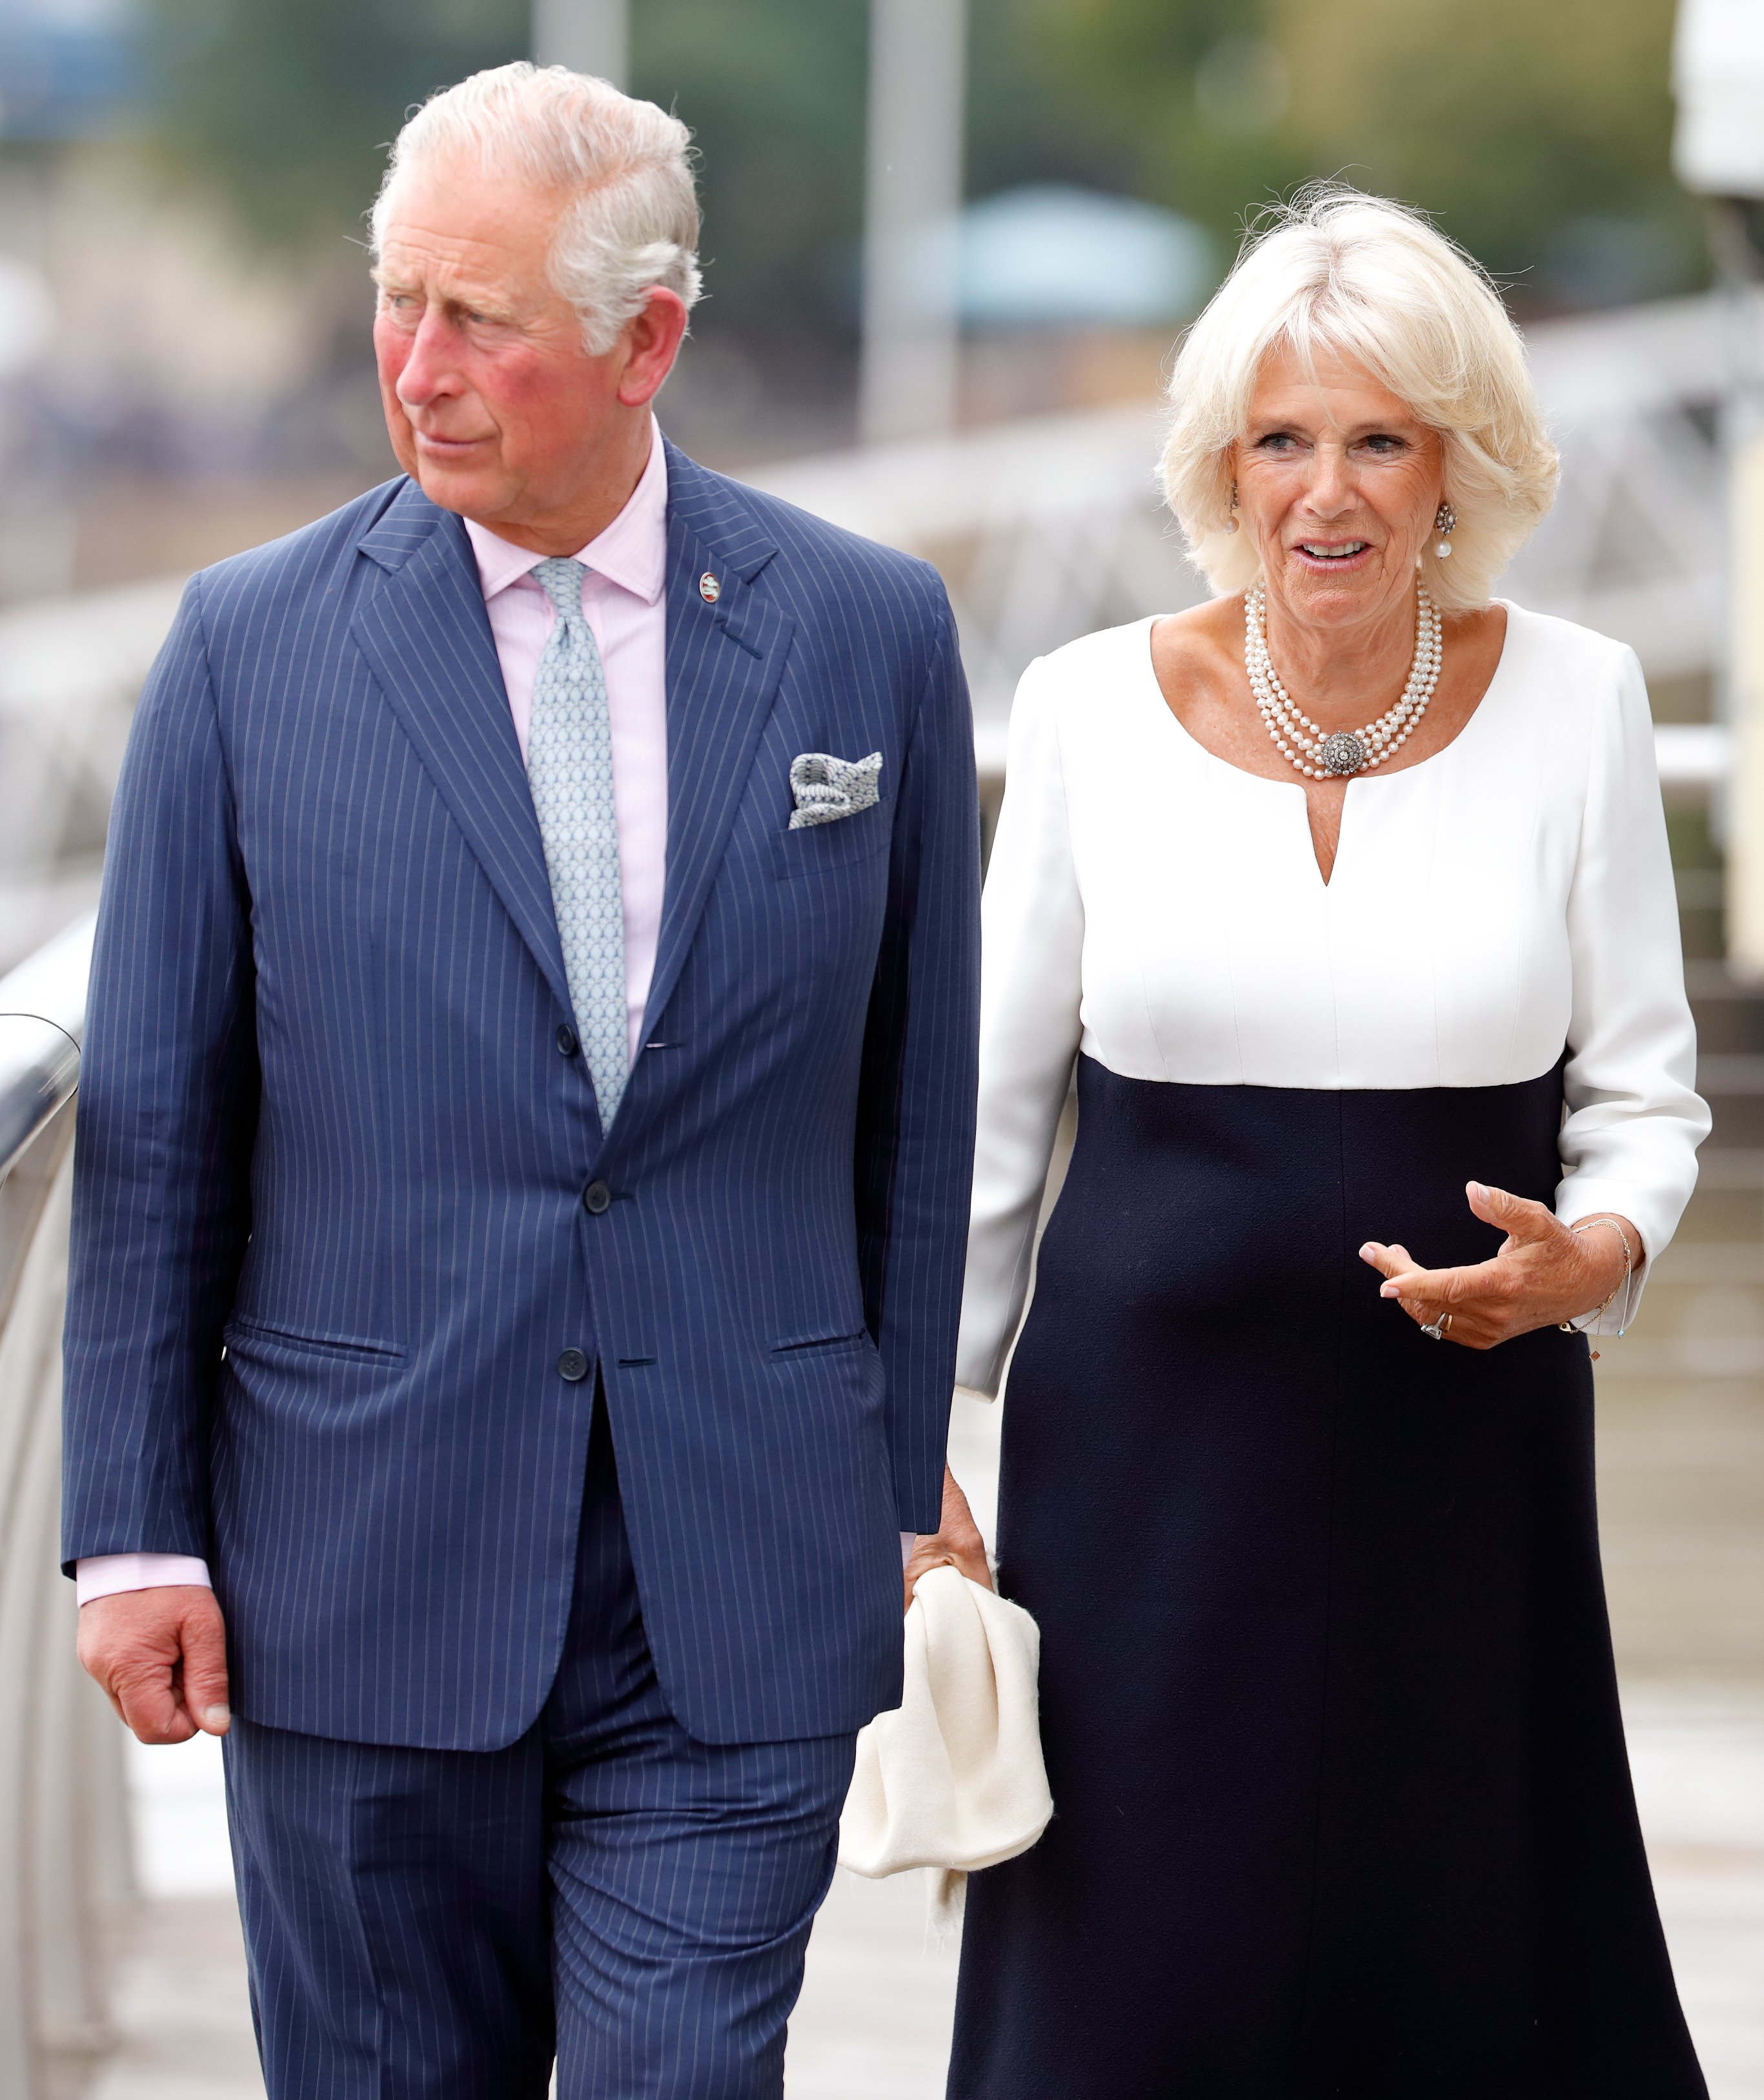 Prince Charles, Prince of Wales and Camilla, Duchess of Cornwall visit the newly refurbished 'Maiden' Yacht at HMS President on September 5, 2018 in London, England | Source: Getty mages